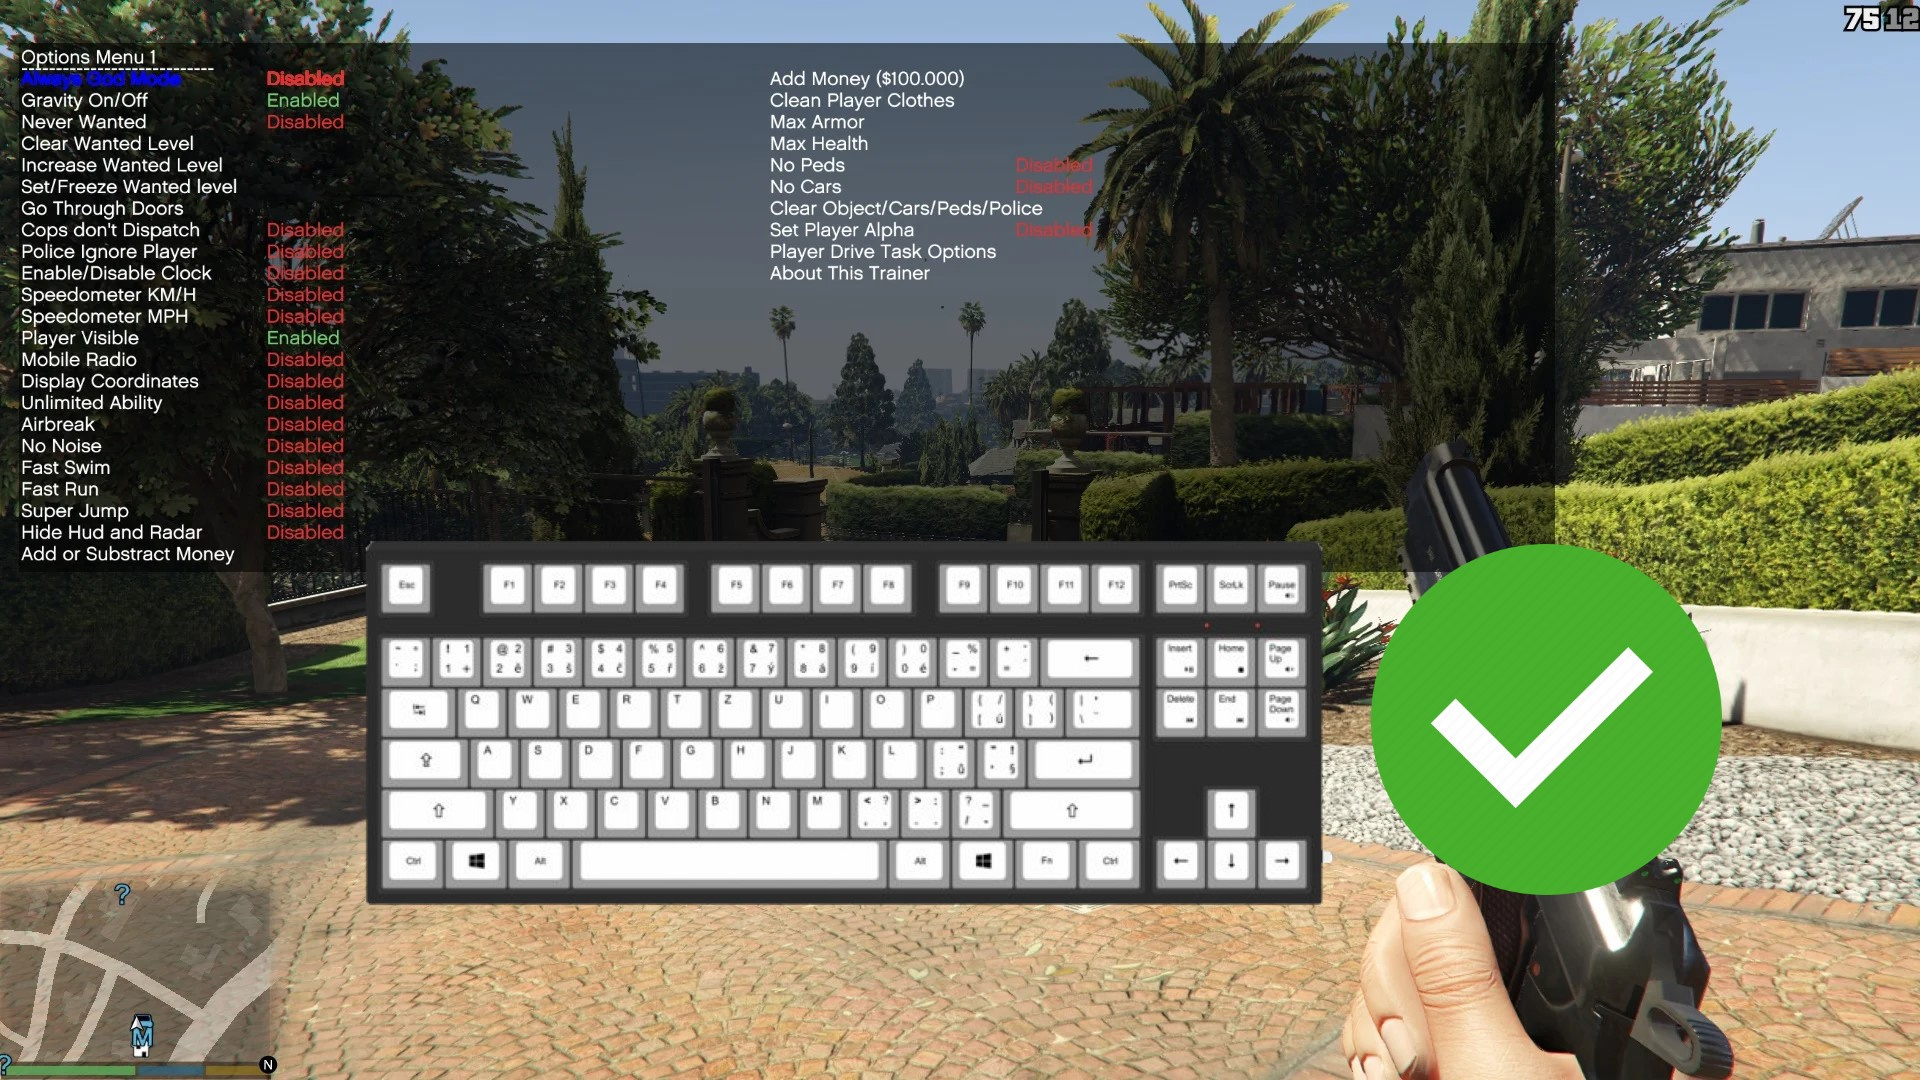 GTA 5 mods - download and install mods in GTA 5 is very simple